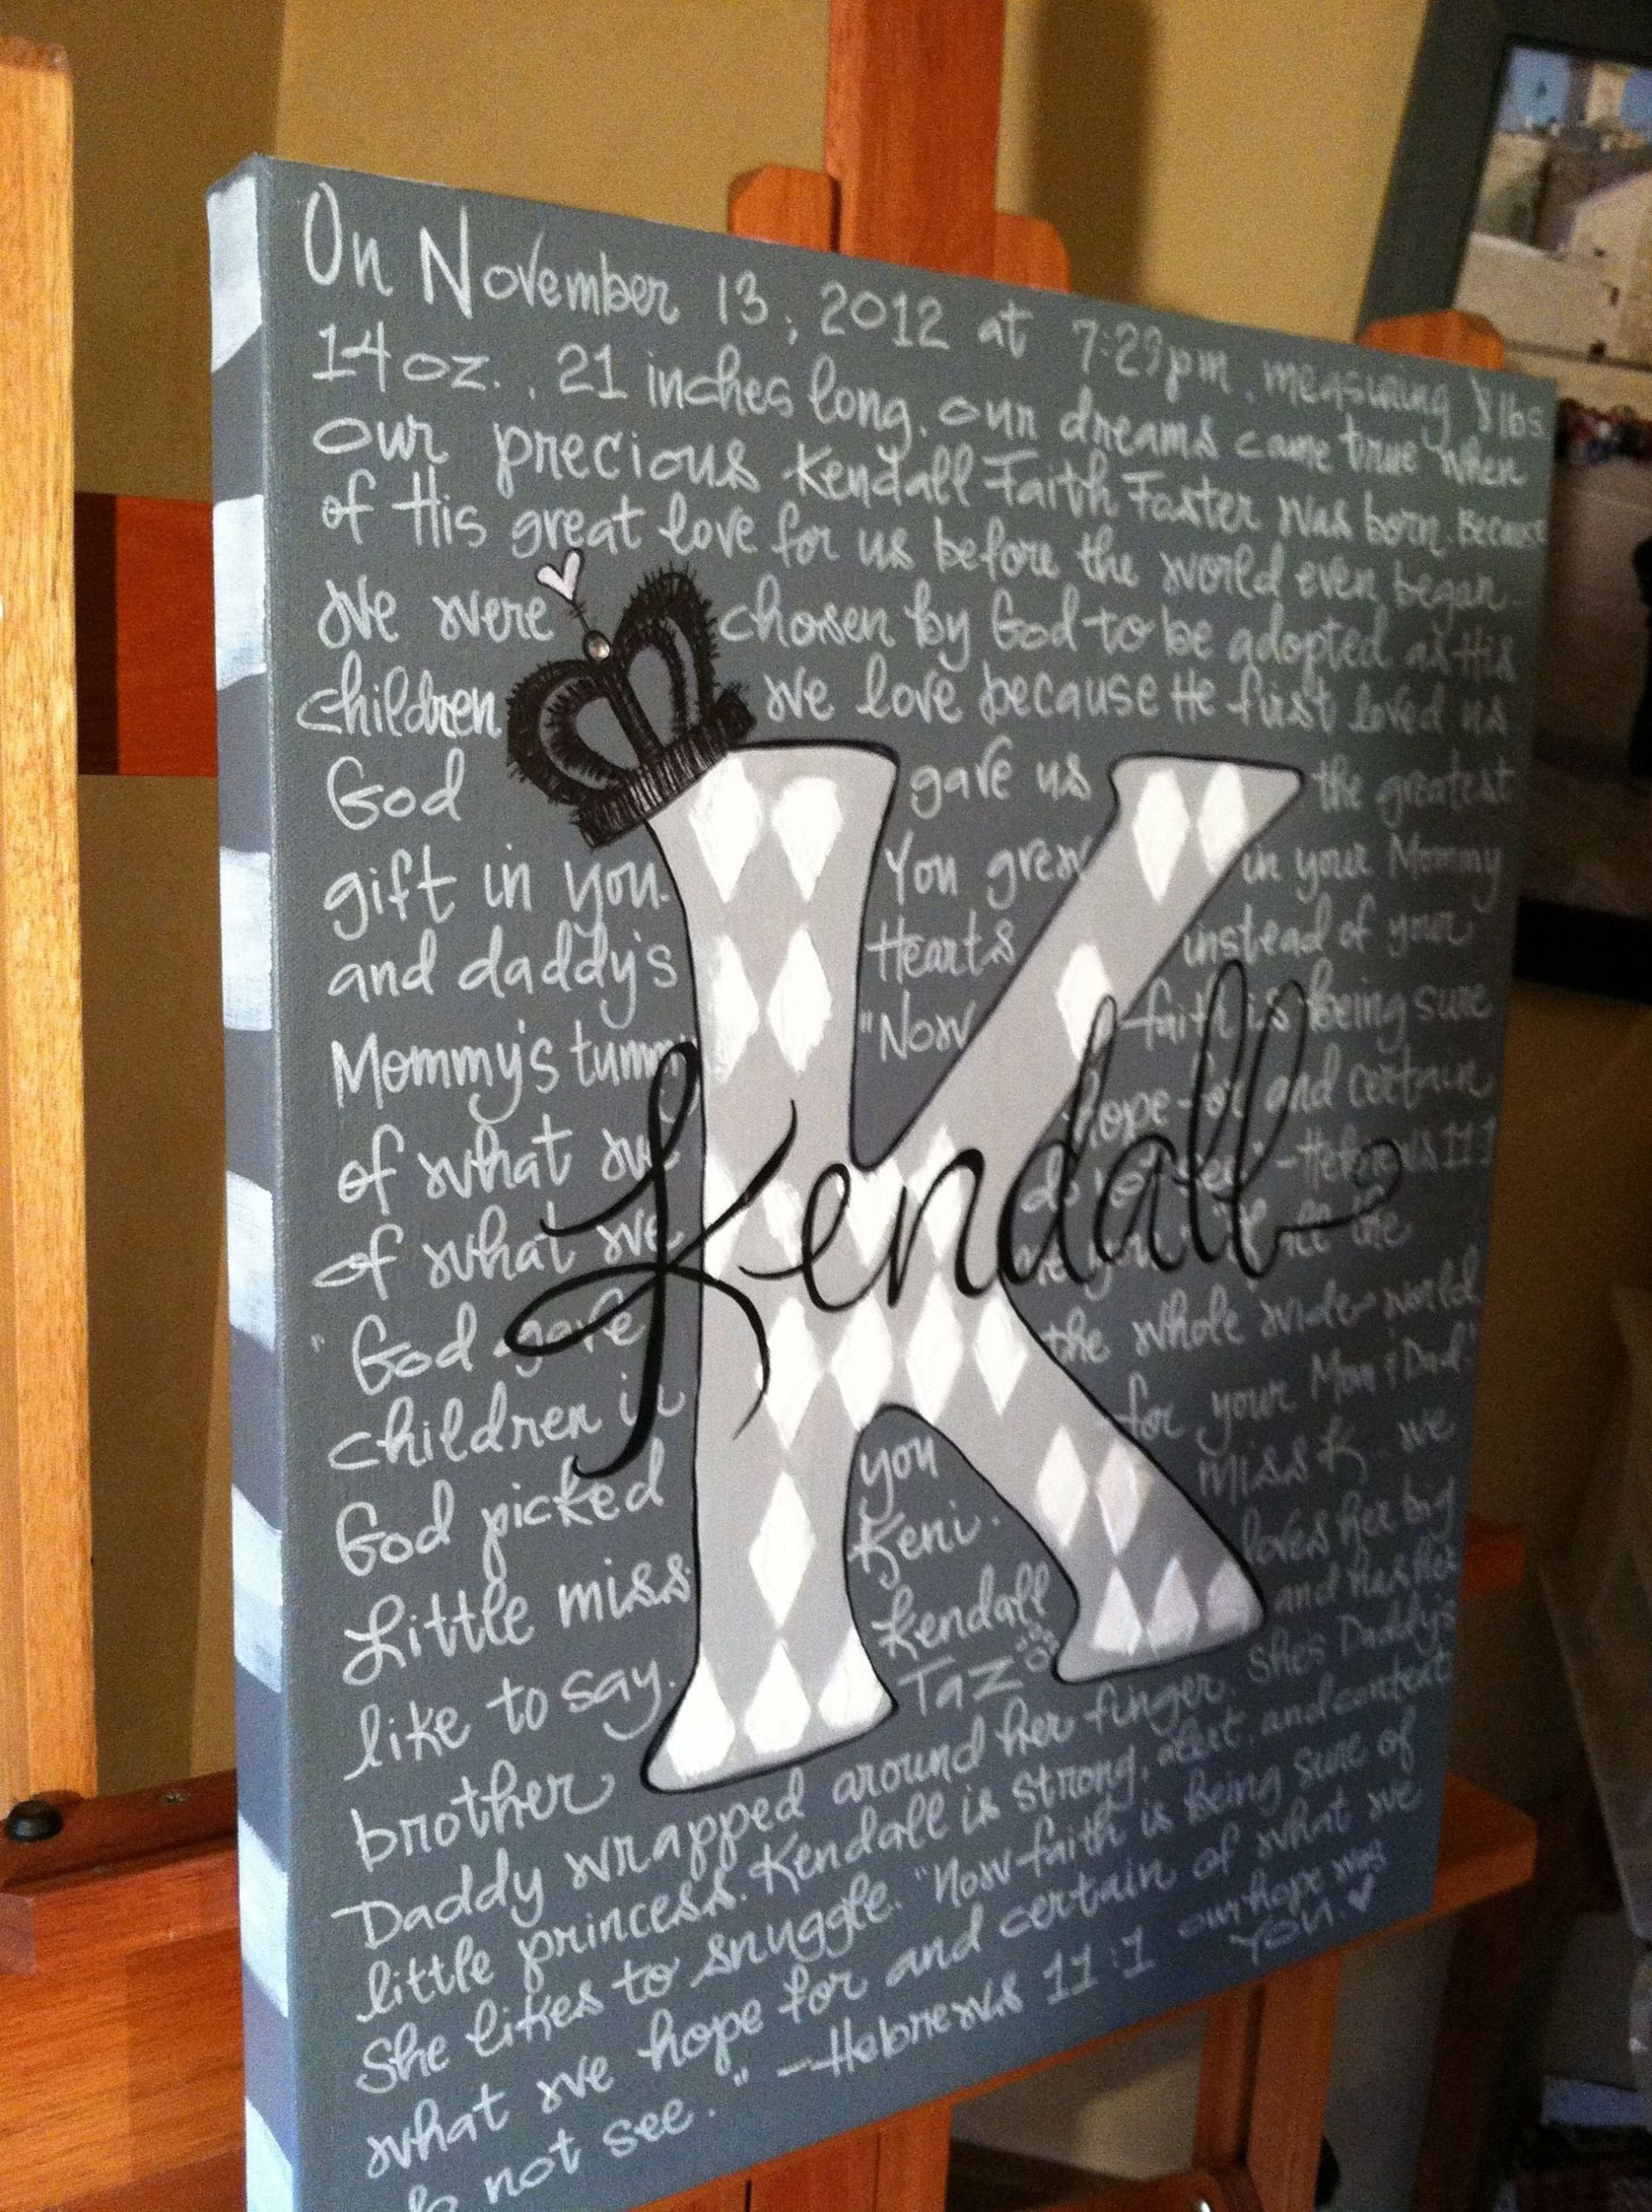 Middle School Graduation Gift Ideas
 Buy canvas and paint it with high school colors and write